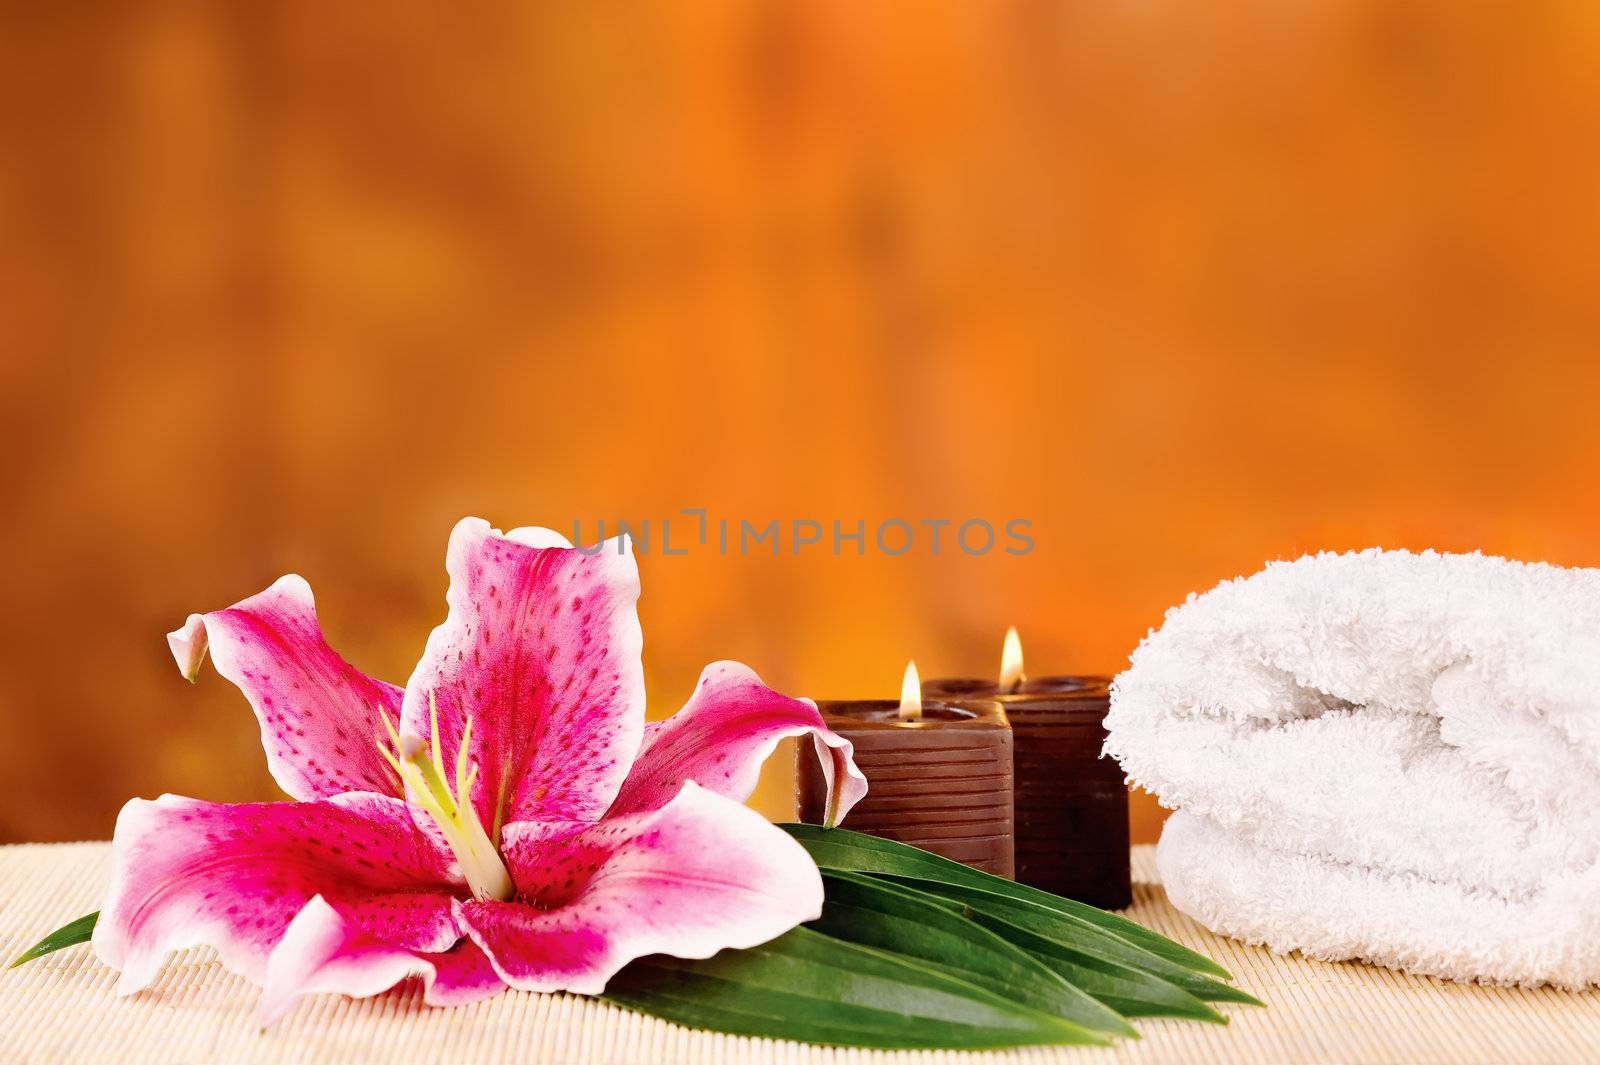 Romantic candle set with orchid in front and white towel 